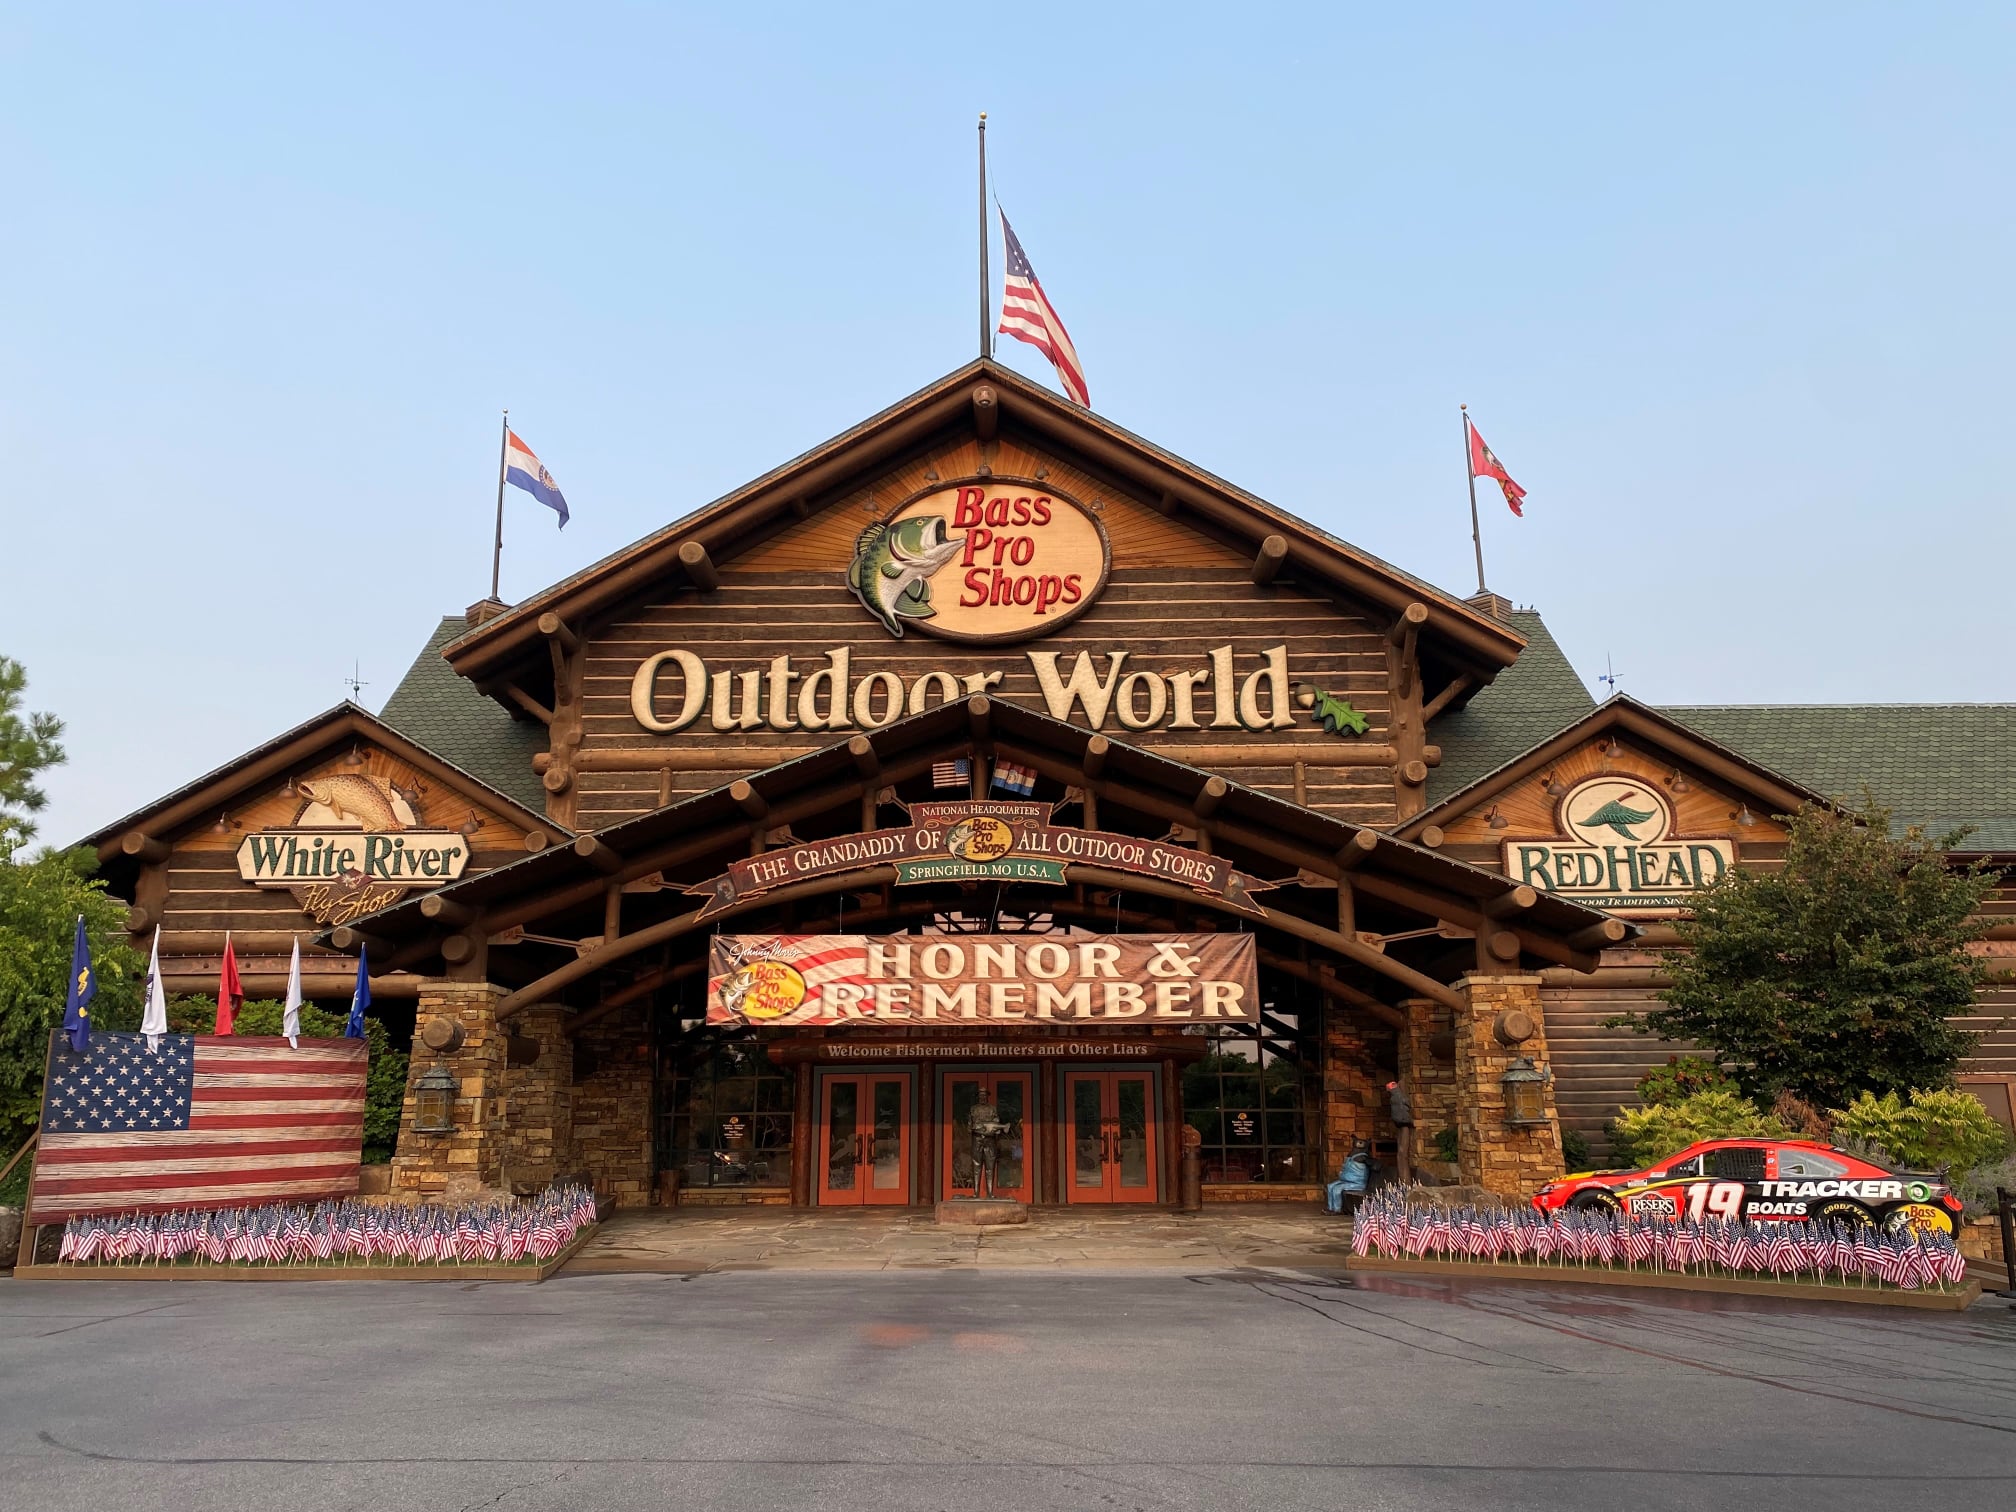 The Bass Pro Shops Store in Manteca California Stock Photo - Alamy